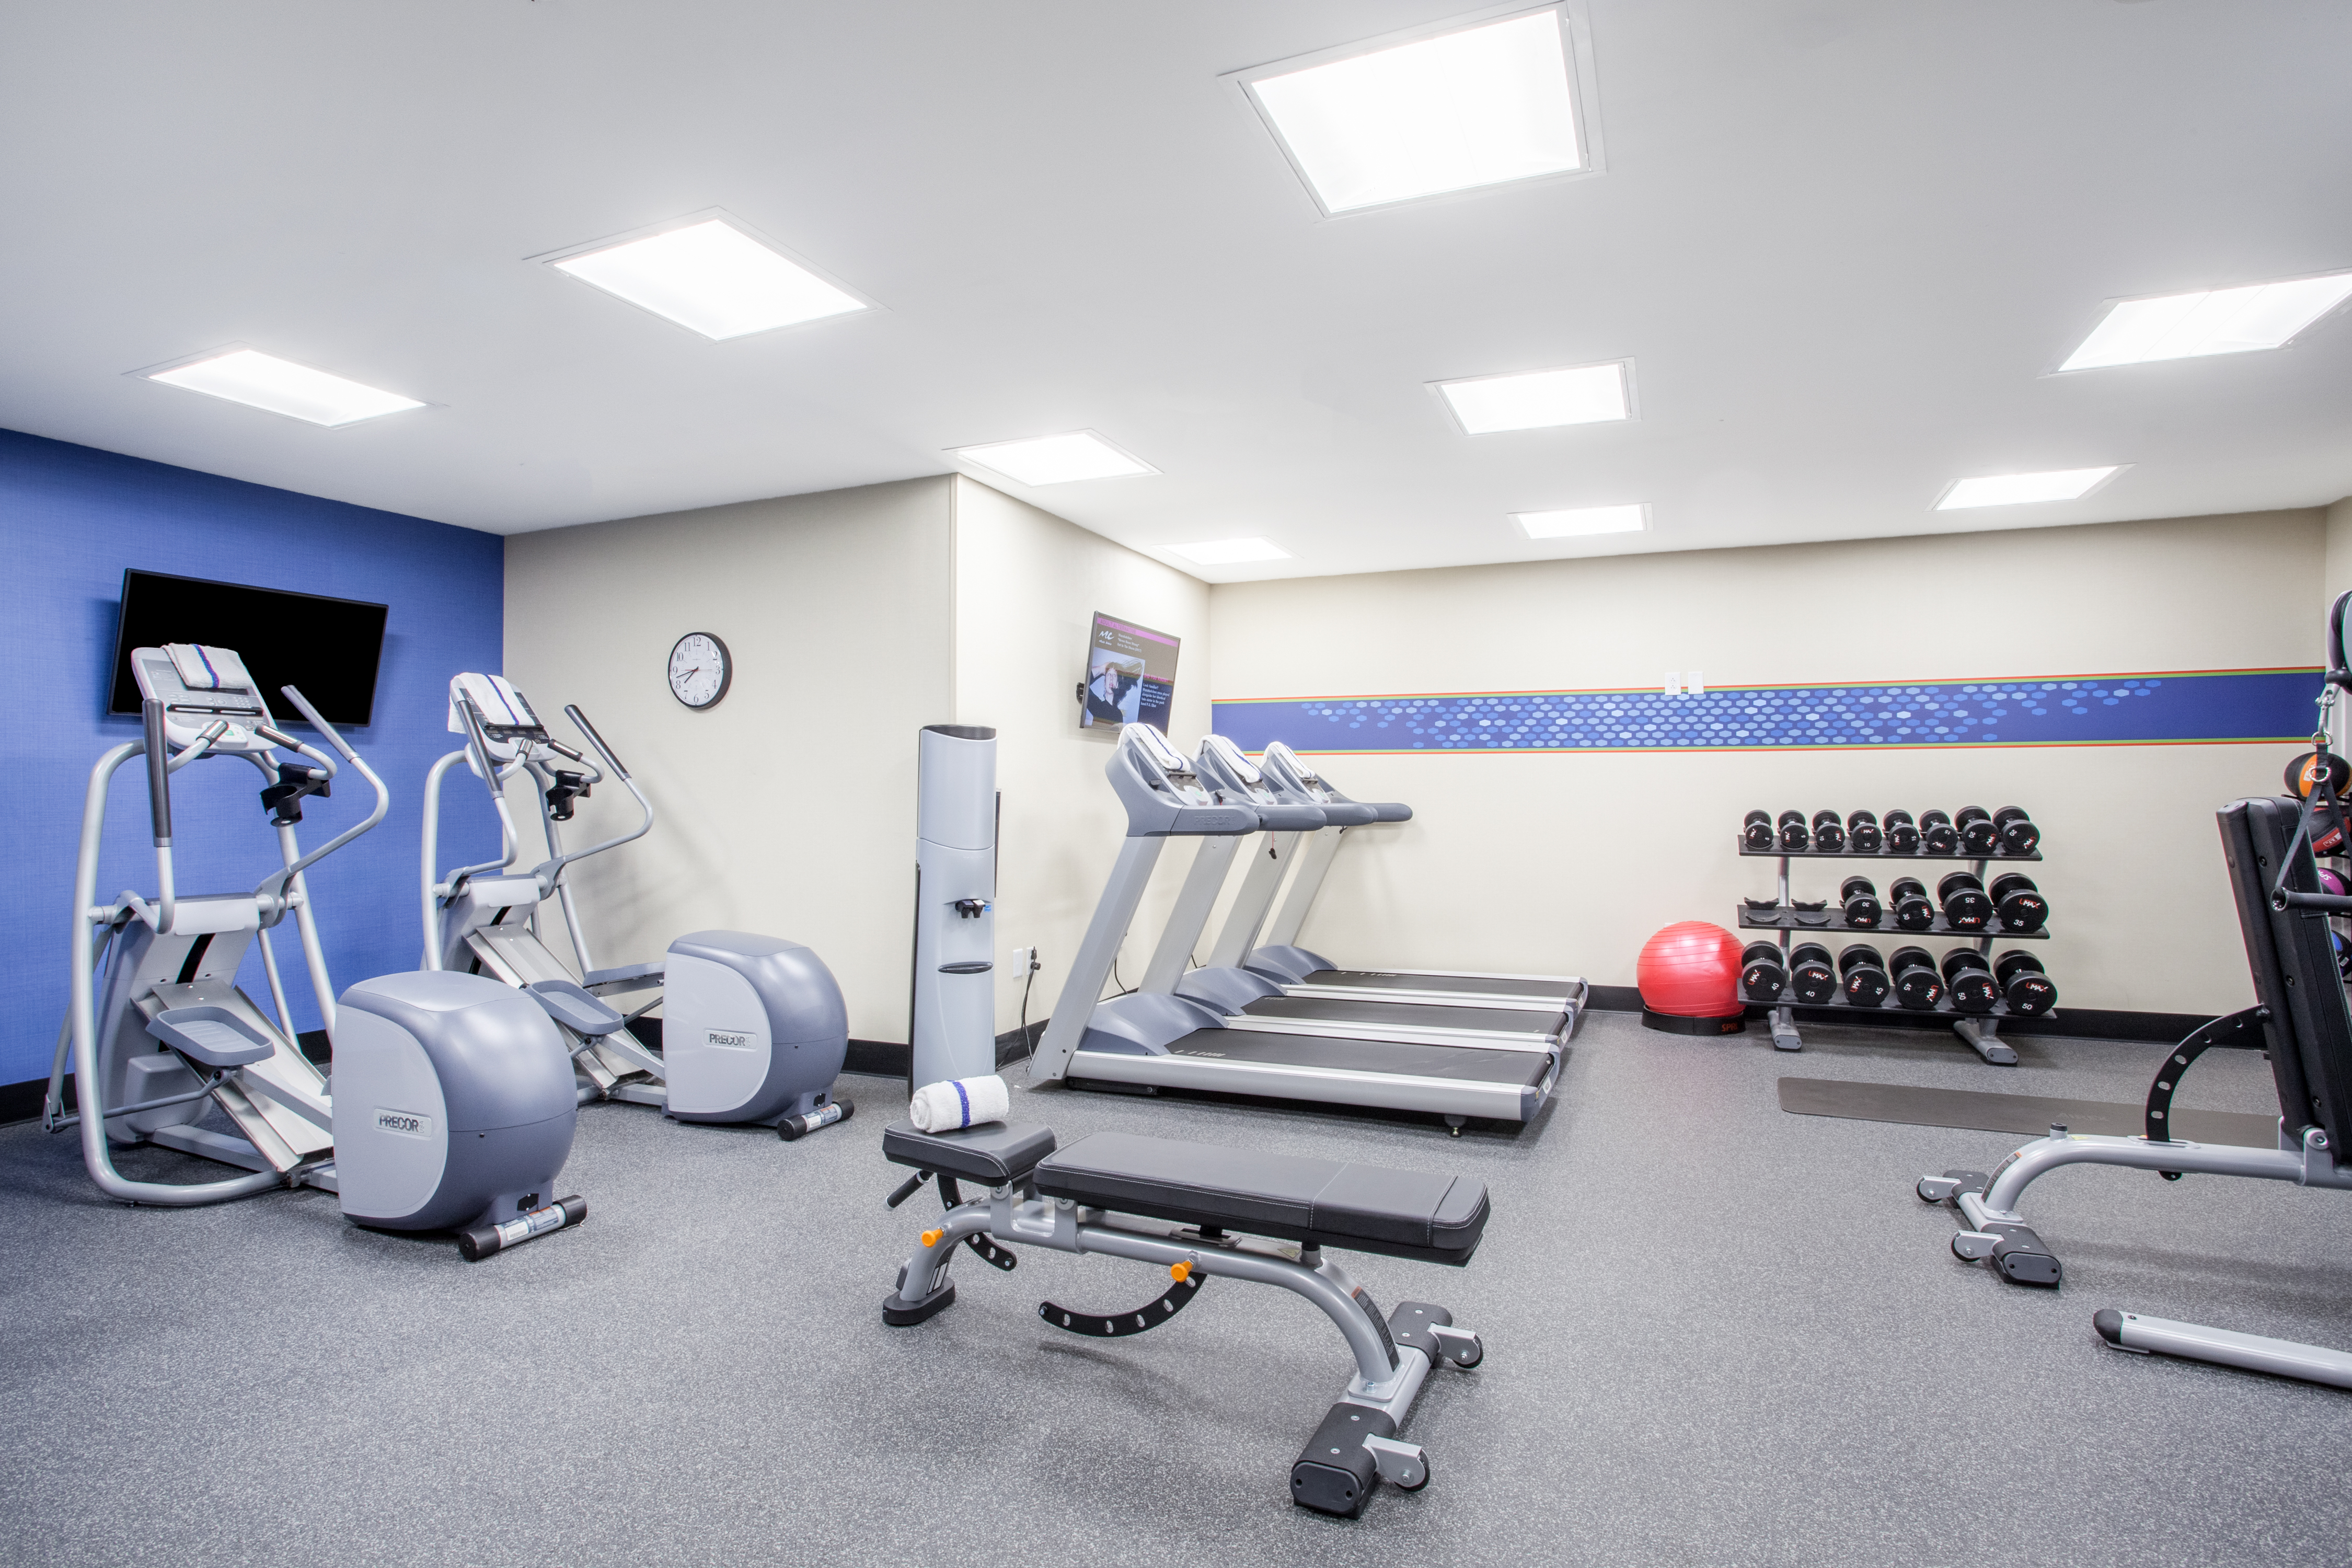 Fitness Center with Treadmills, Weight Bench, Cross-Trainers and Dumbbell Rack